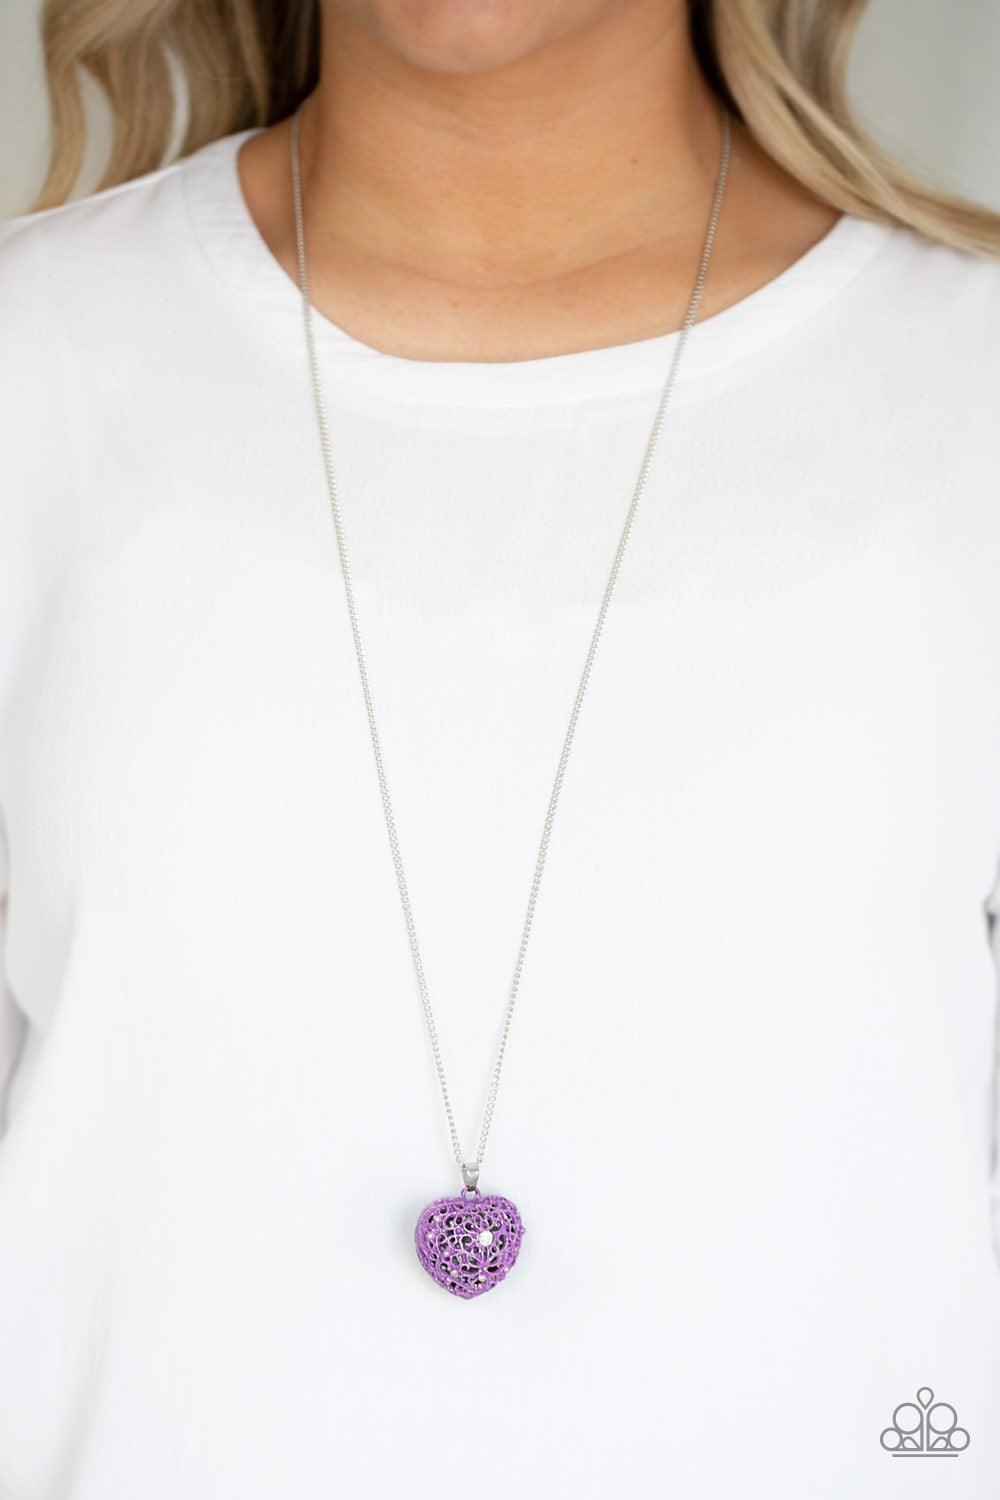 Paparazzzi Acceessories-Love Is All Around - Purple Necklace - jewelrybybretta